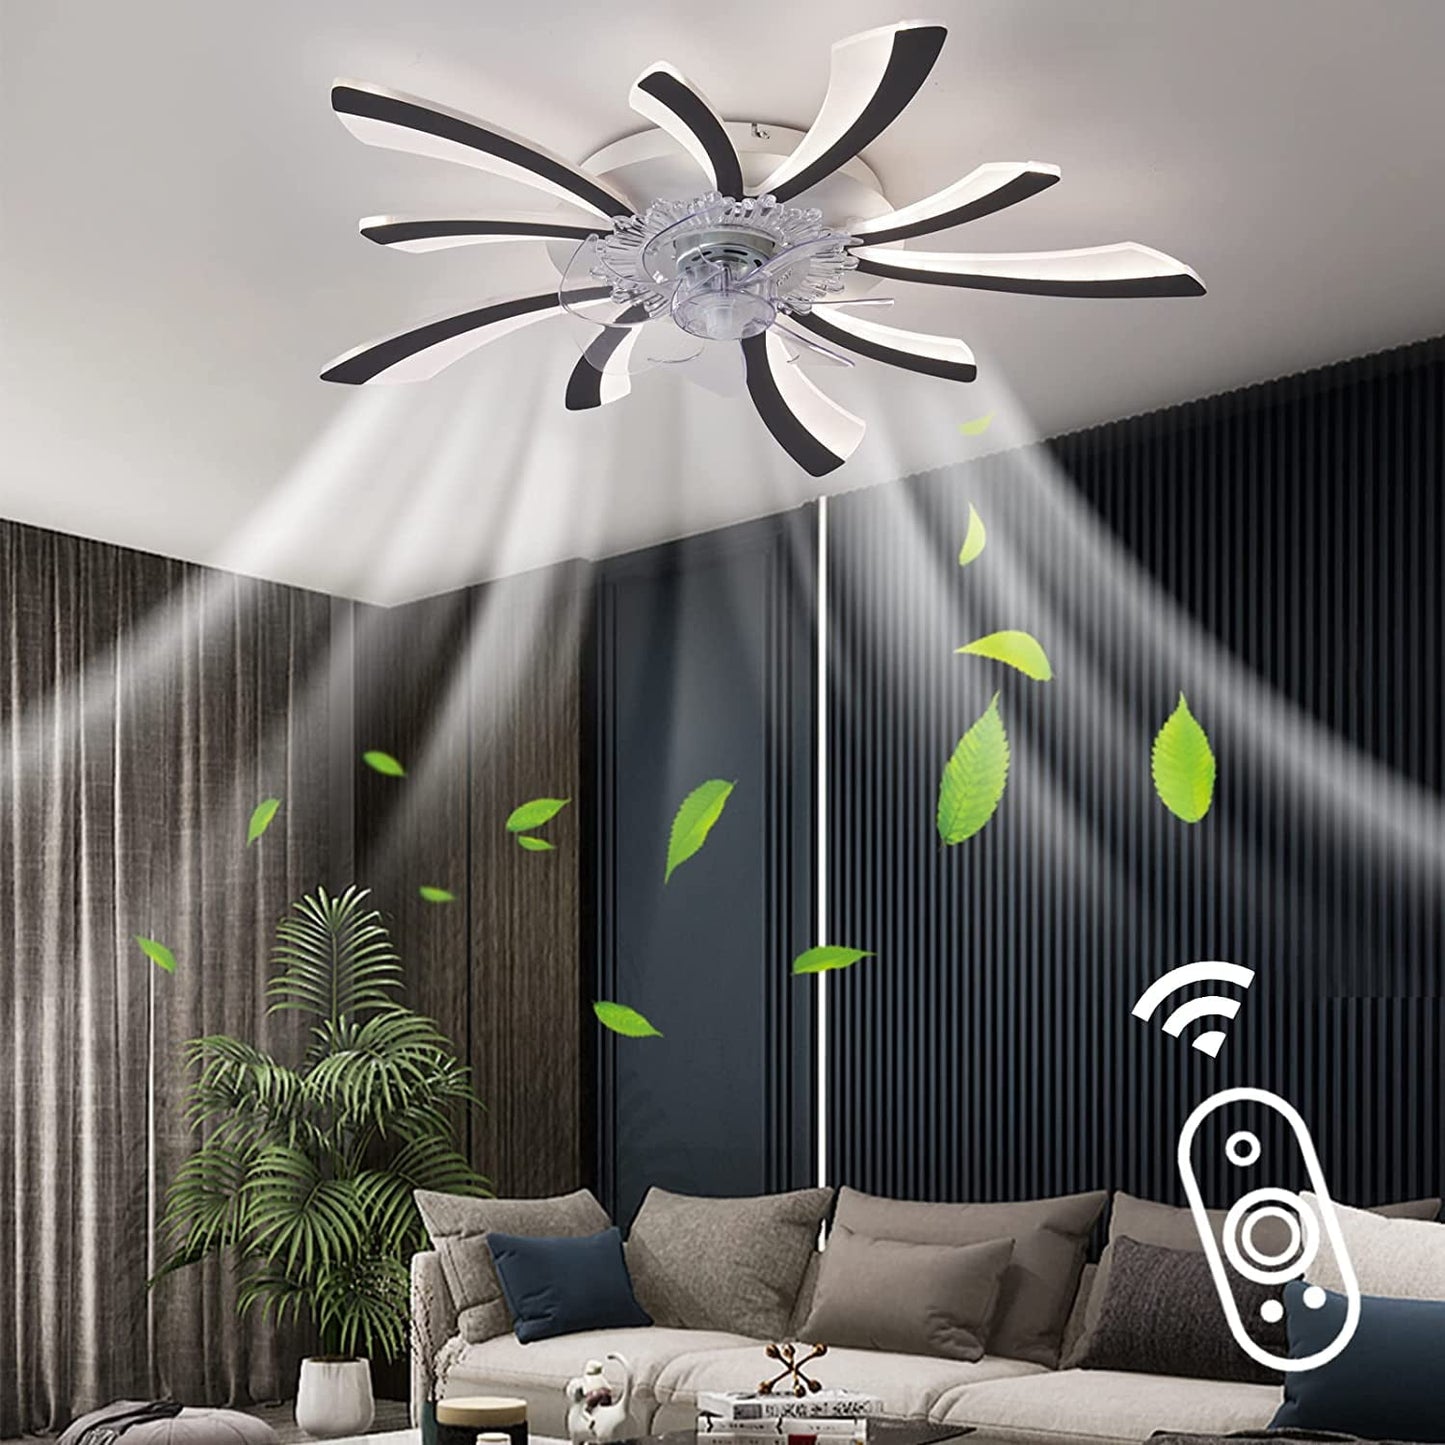 27In Low Profile Ceiling Fans with Lights,White Modern Dimmable Flower Shape,6 Speeds 3 Light Color Flush Mount Ceiling Fan with Remote Control/App Control for Bedroom Children's Room Dining Room